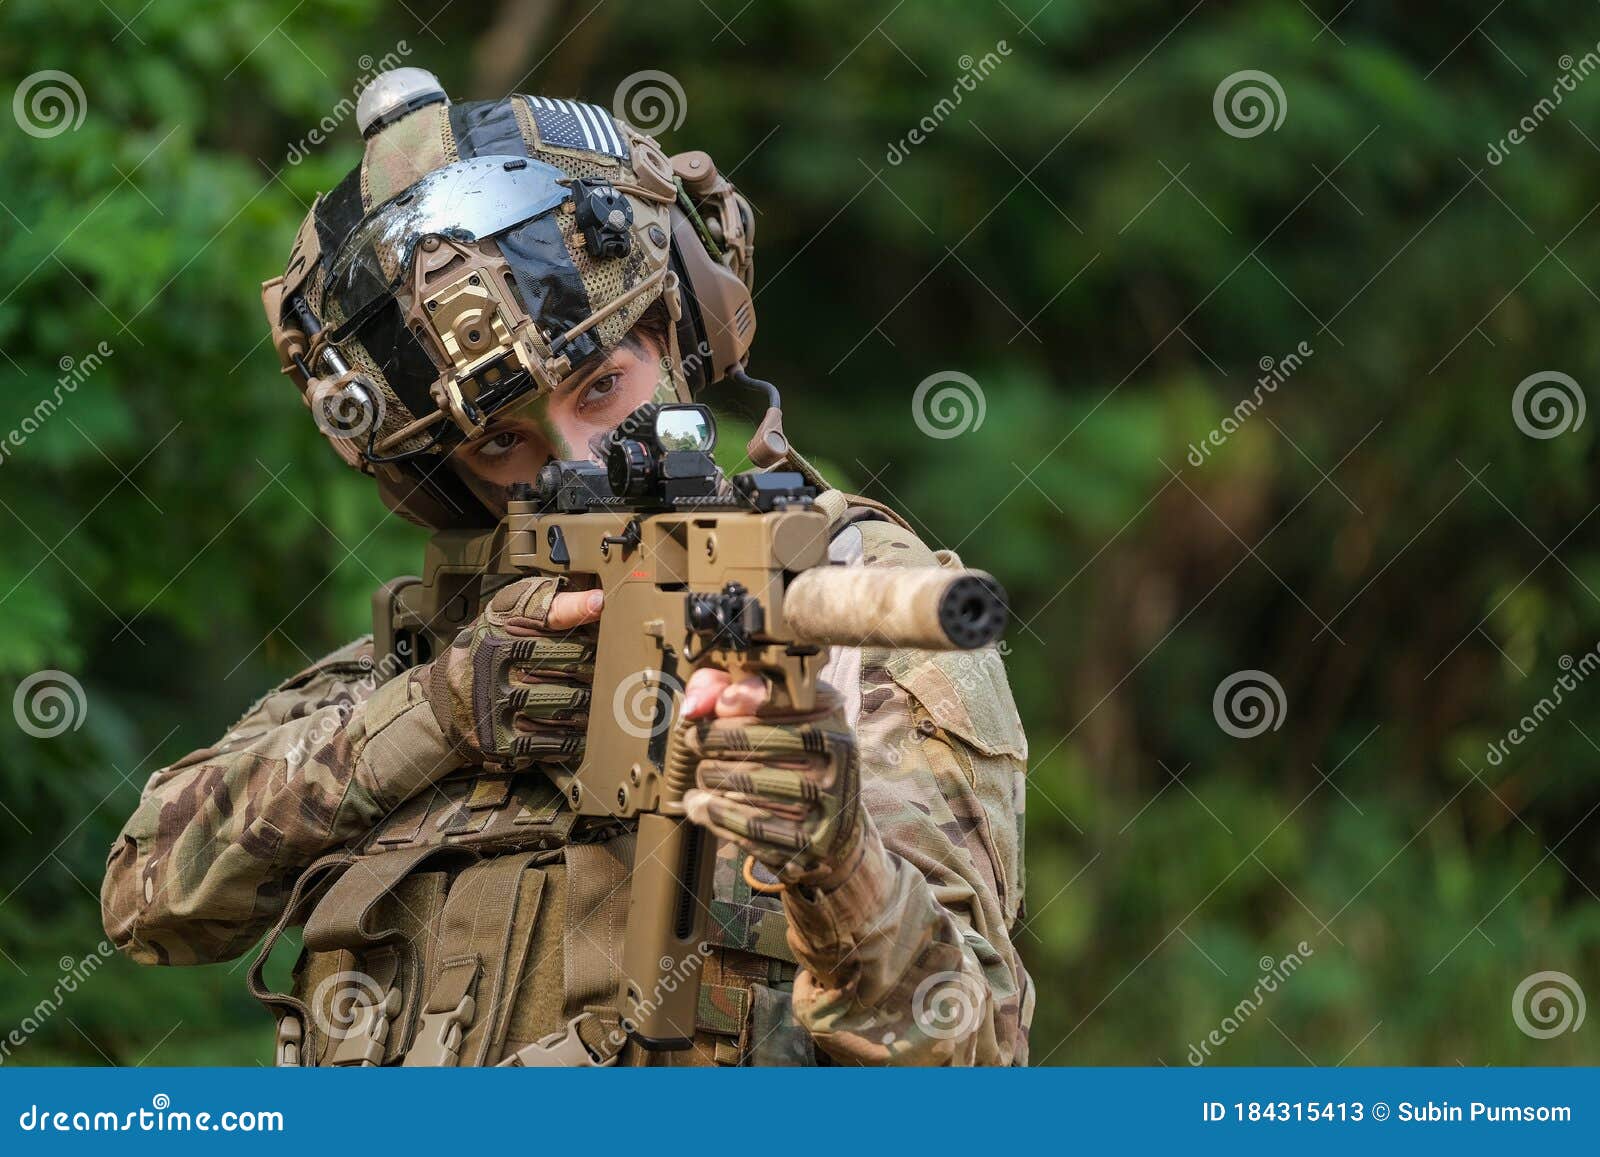 United States Army Rangers During The Military Operation In Smoke And Fire Stock Image Image Of Smoke Soldier 184315413